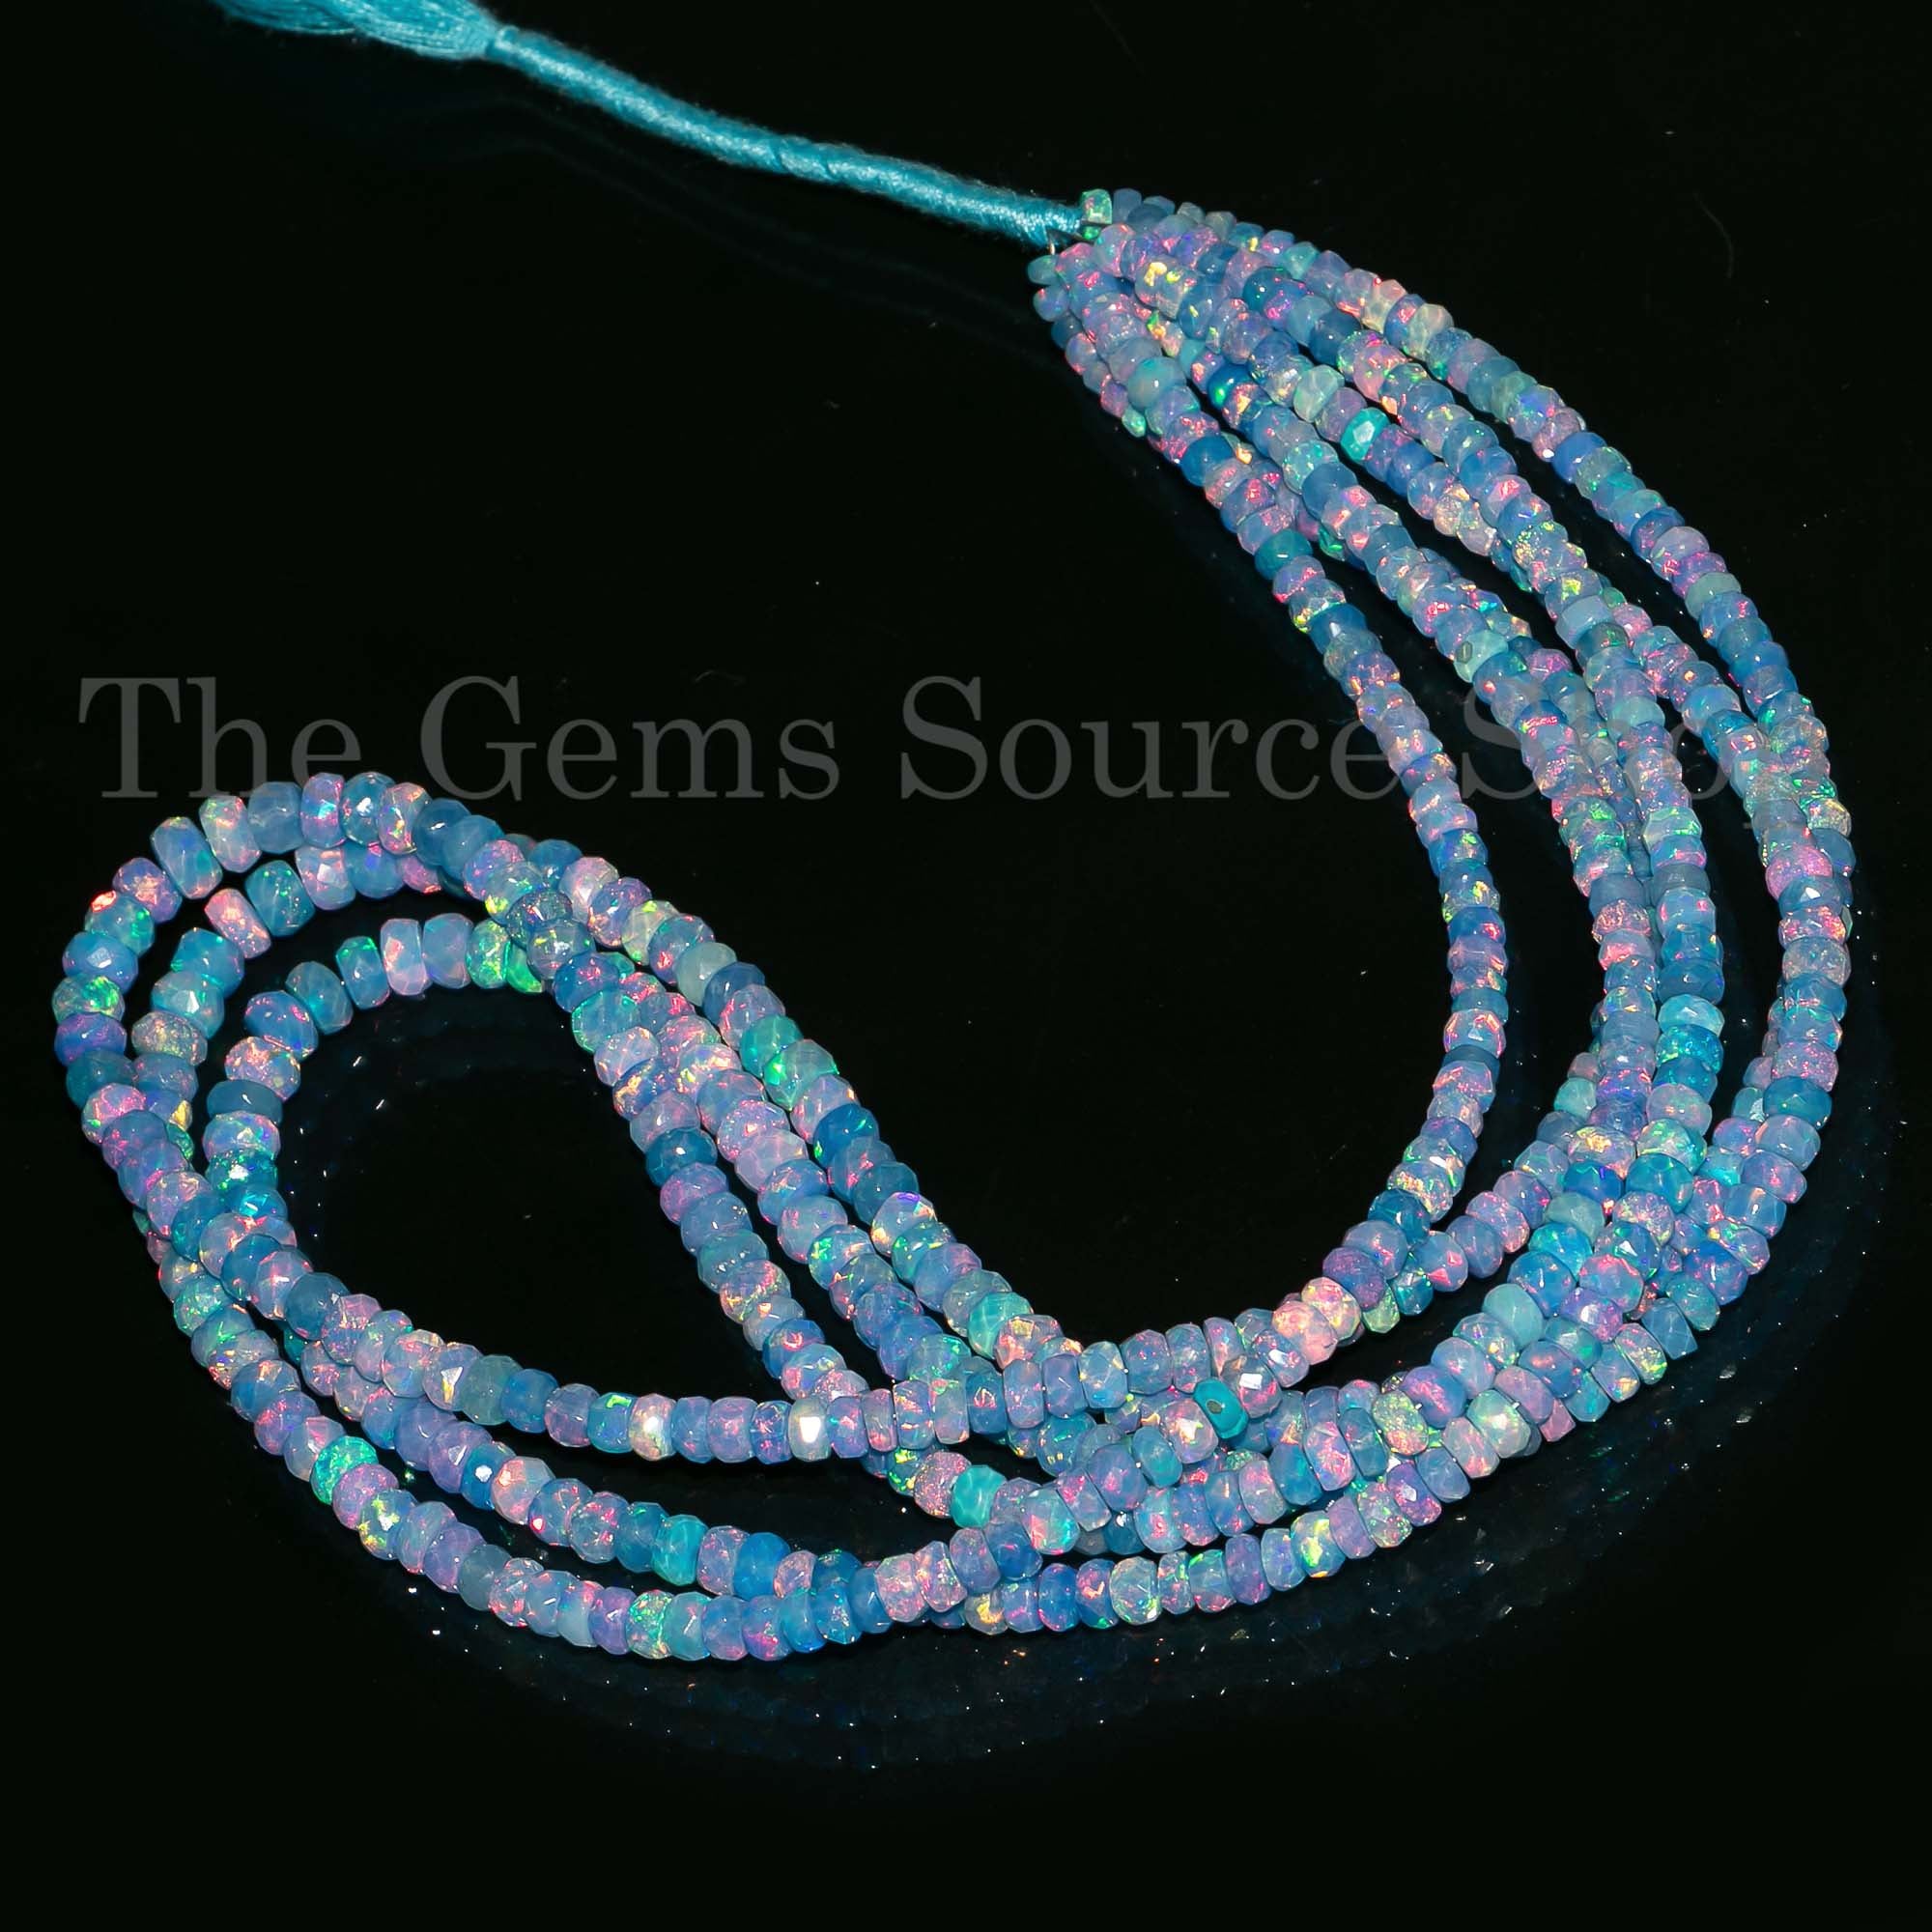 Lavender Opal Beads, 3.5-5.5mm Opal Rondelle Beads, Opal Faceted Beads, Rondelle Beads , Lavender Opal Faceted Beads, Opal Gemstone Beads